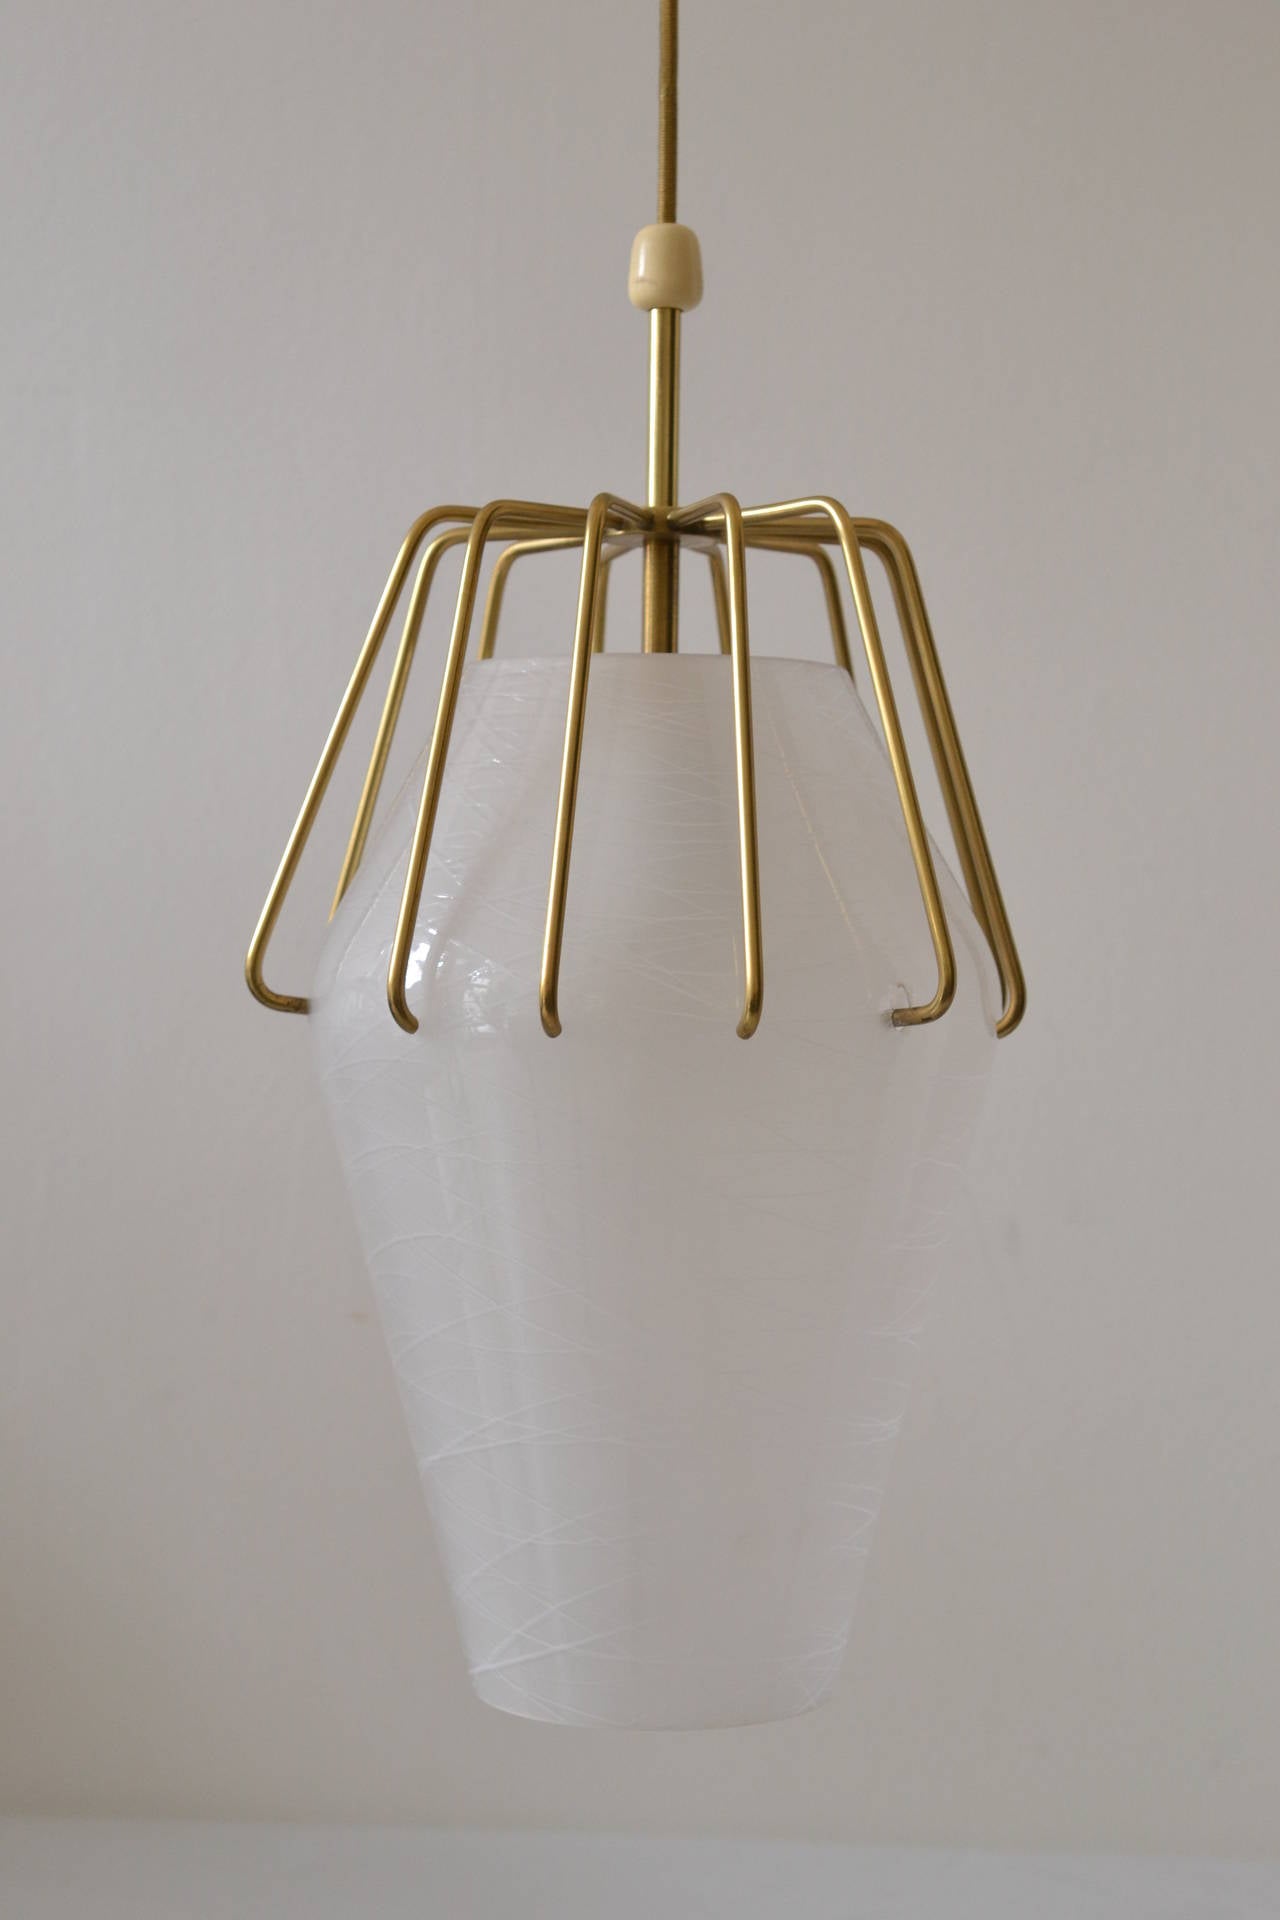 pendant circa 1960
original condition
the height of the chandelier is easily adjustable to fit different rooms,